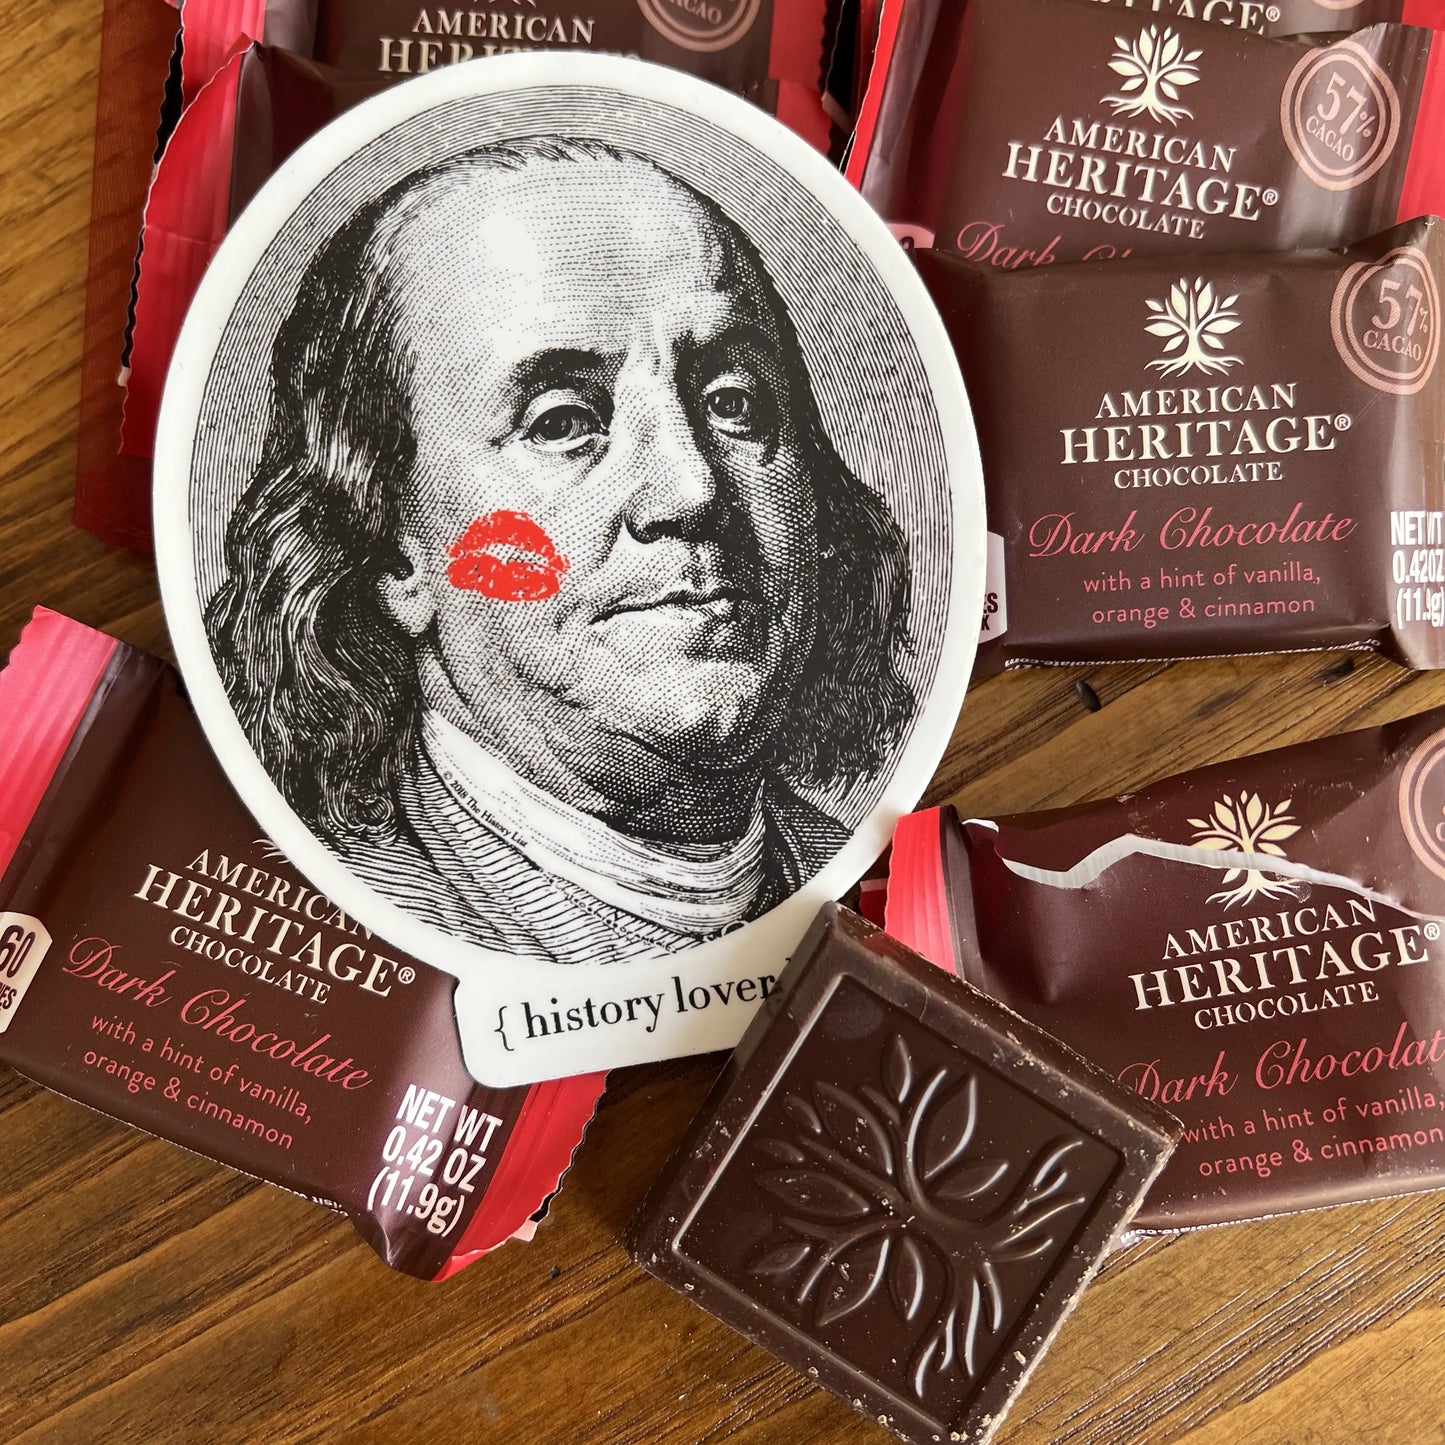 American Heritage Chocolate History Lover Gift Bag—Save $5 or more when you buy two or more